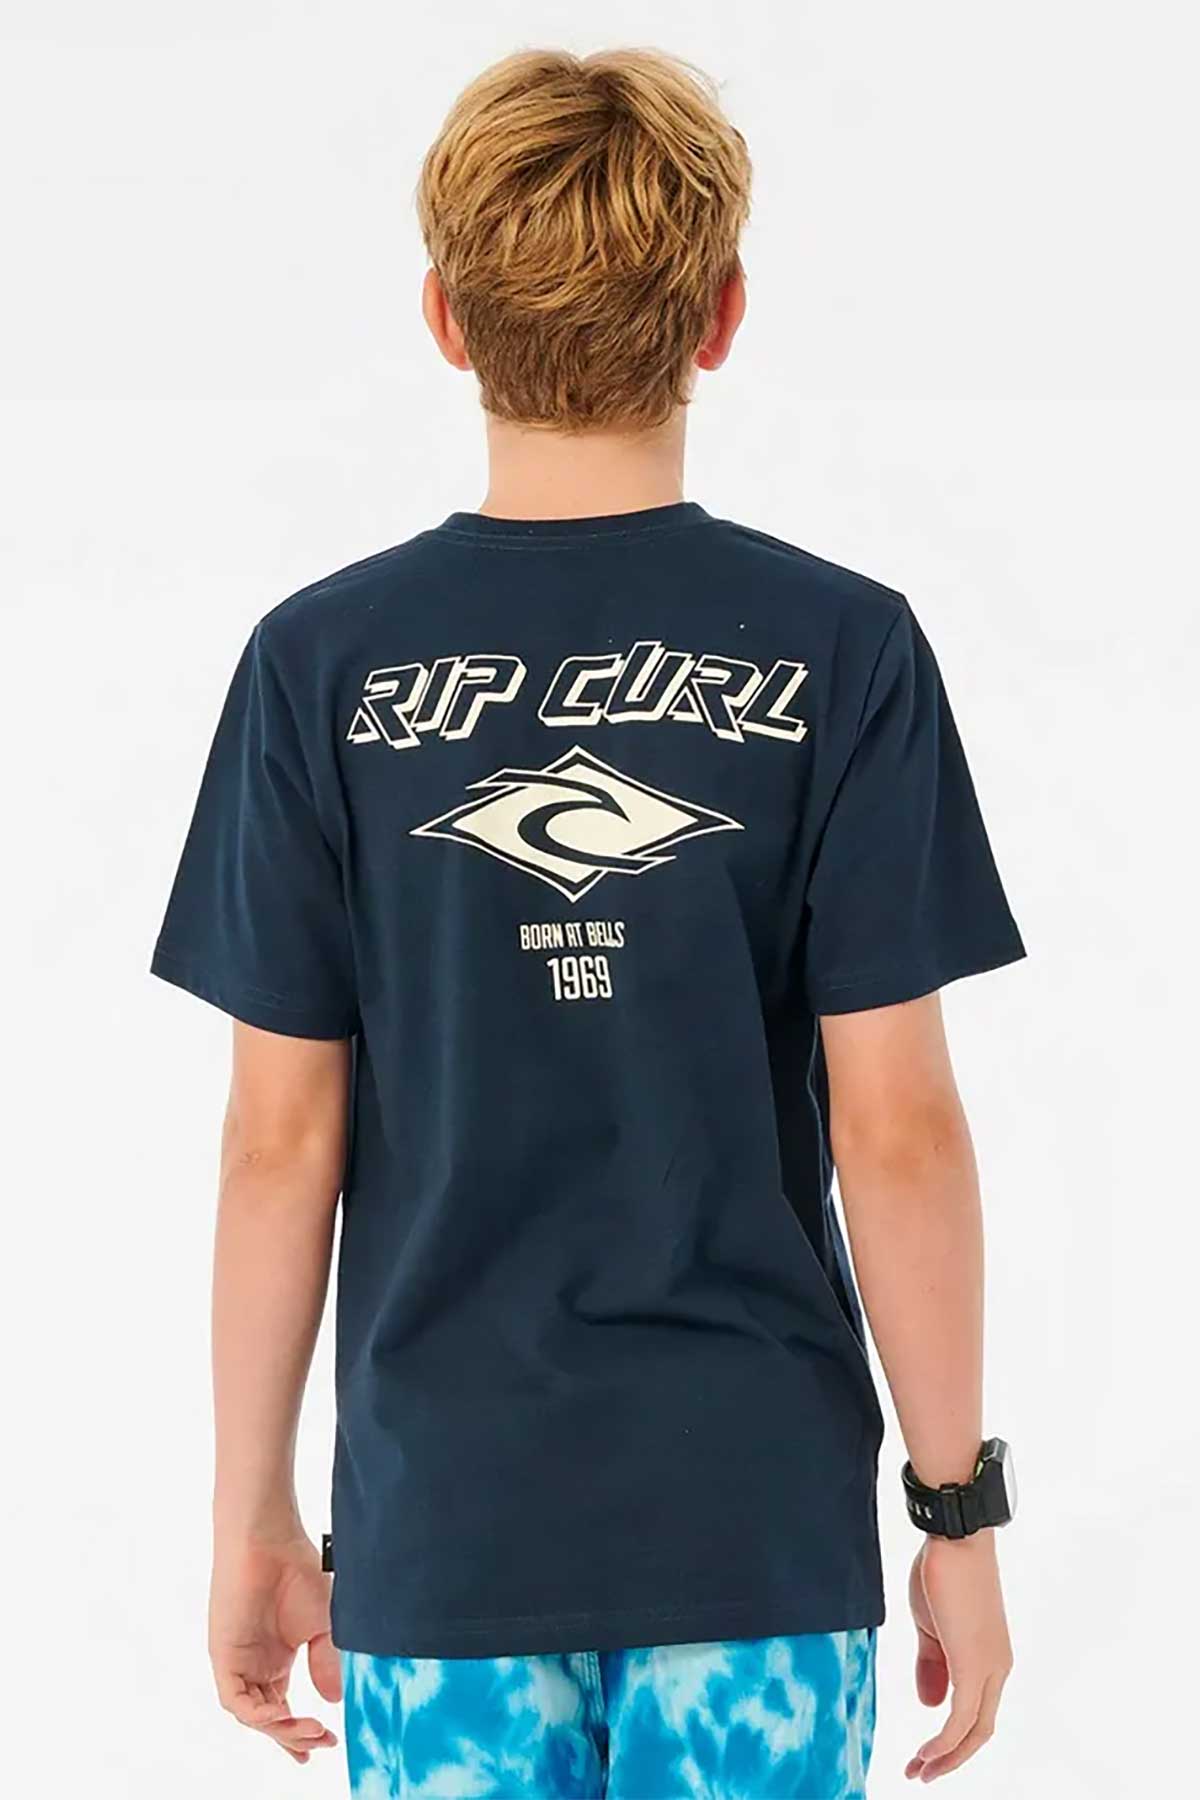 Ripcurl boys Fade out tee